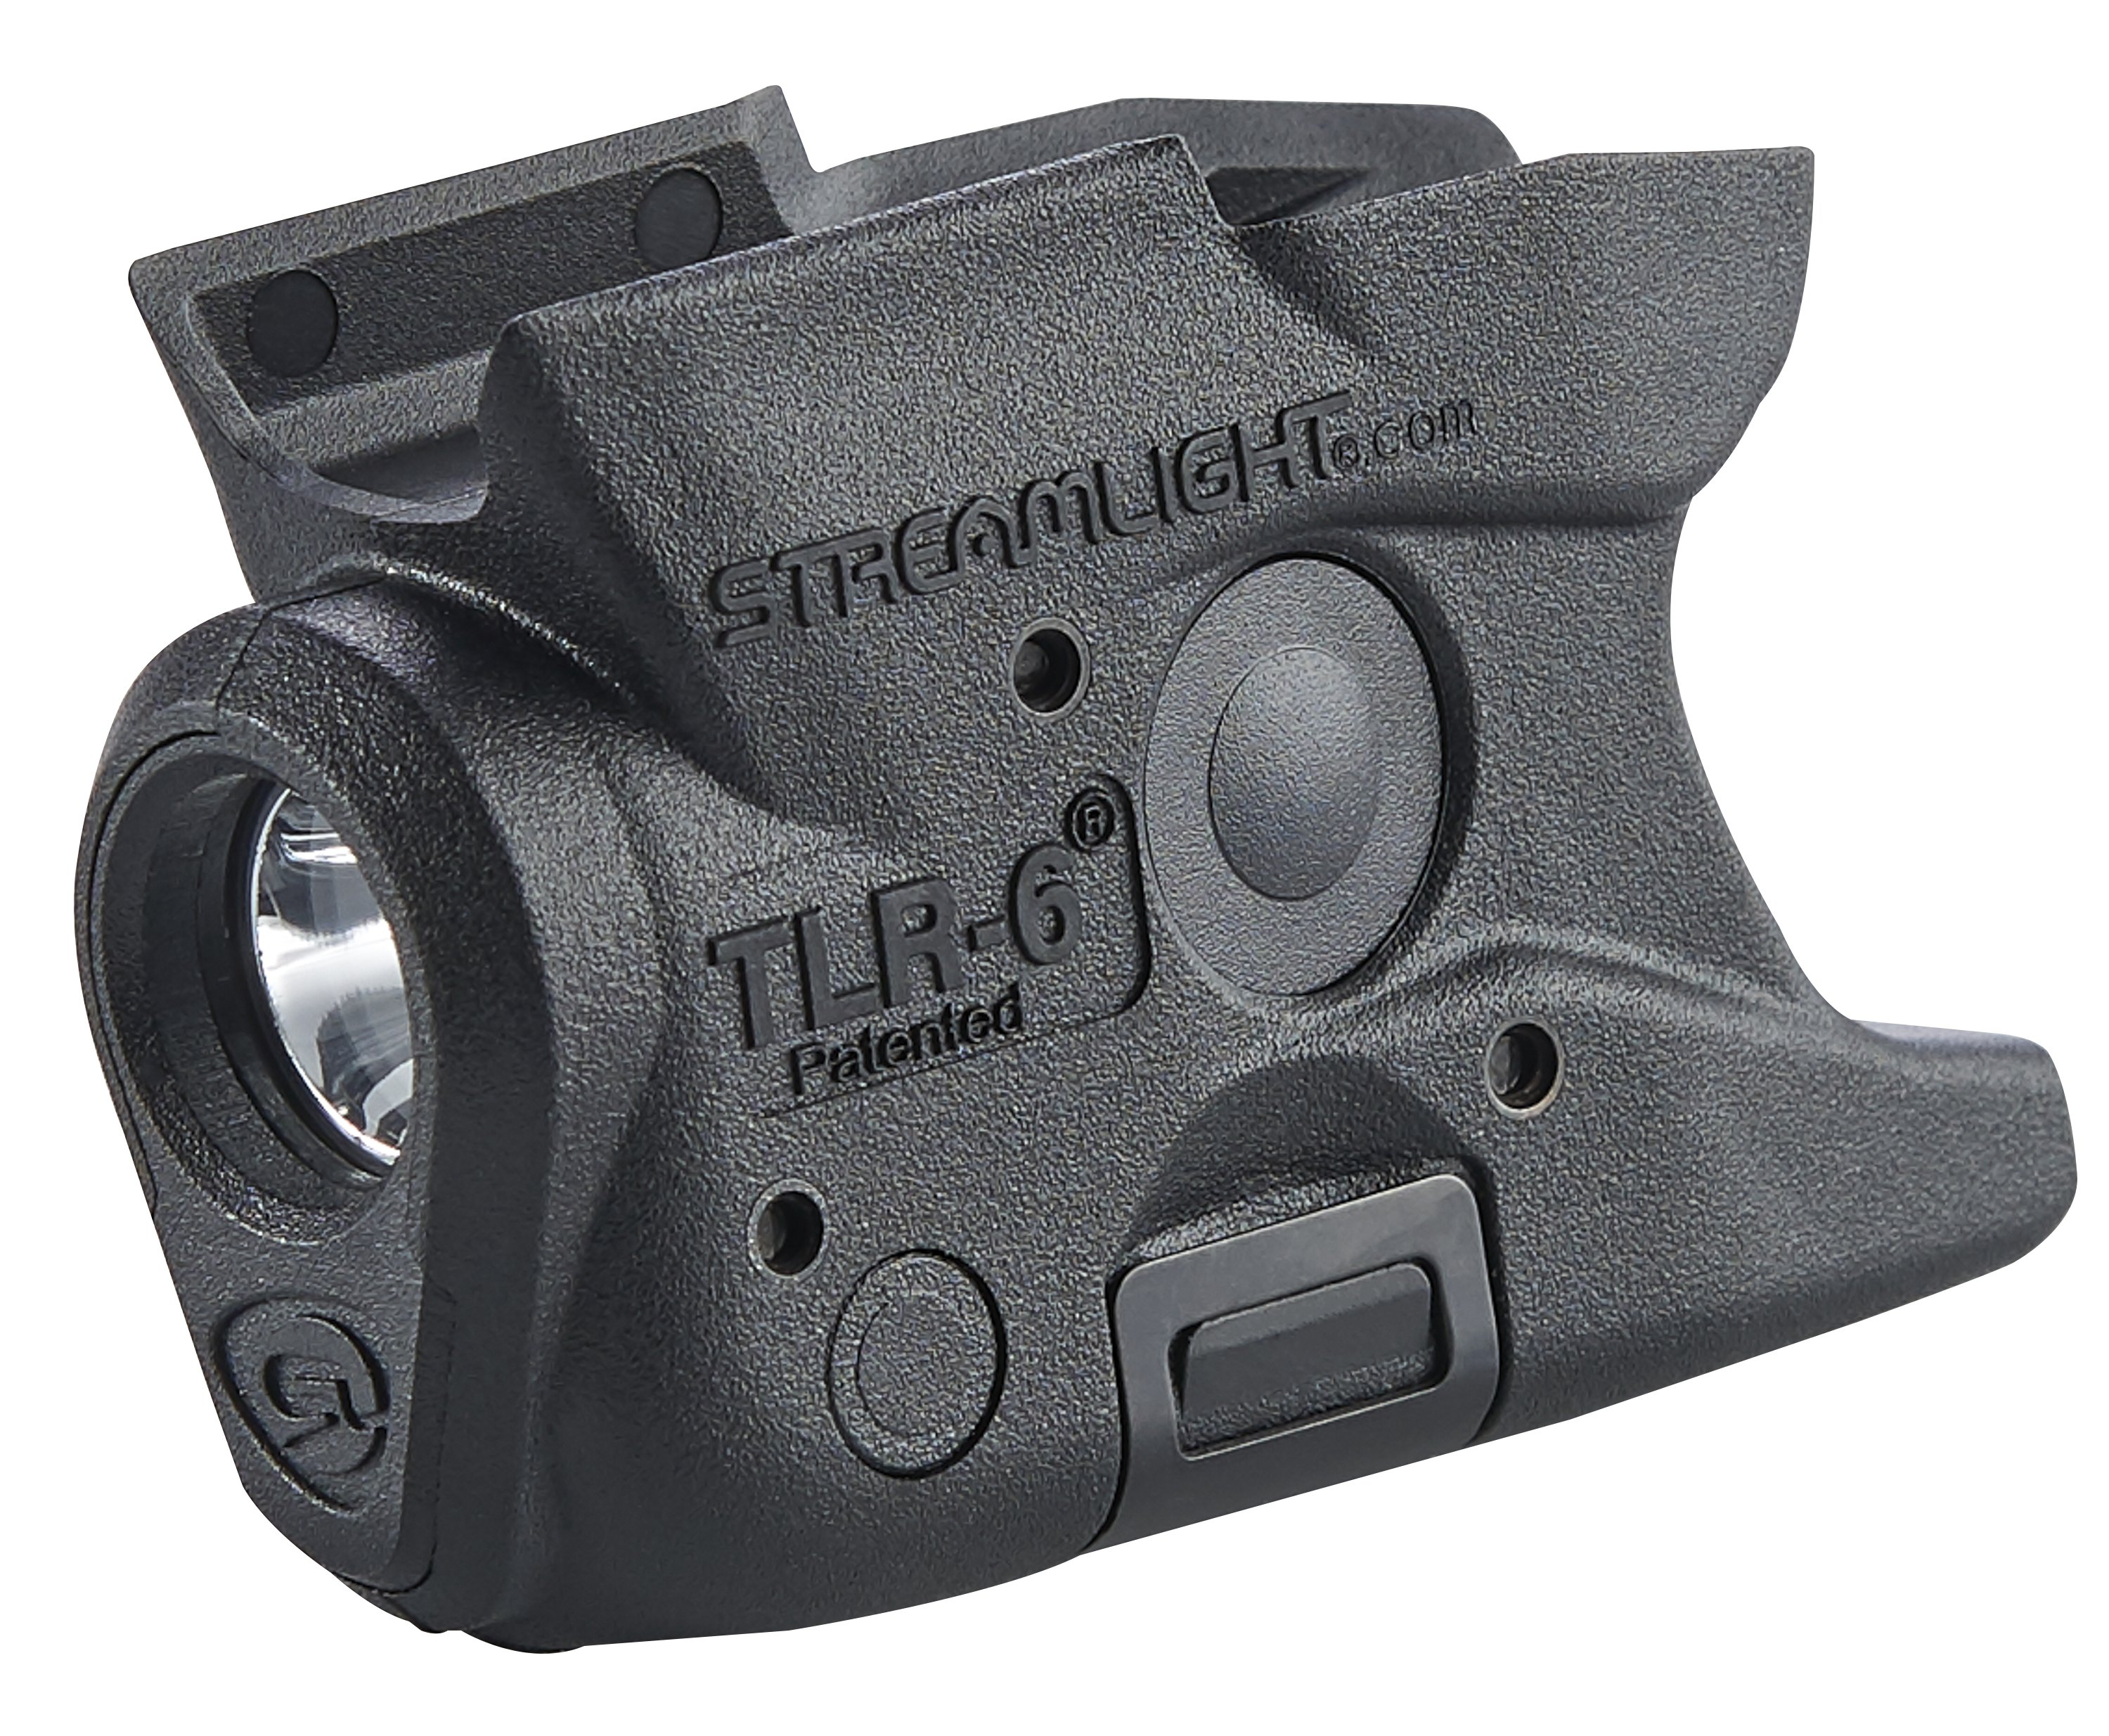 Streamlight TLR-6 Tactical Light | 42% Off 4.4 Star Rating w/ Free 